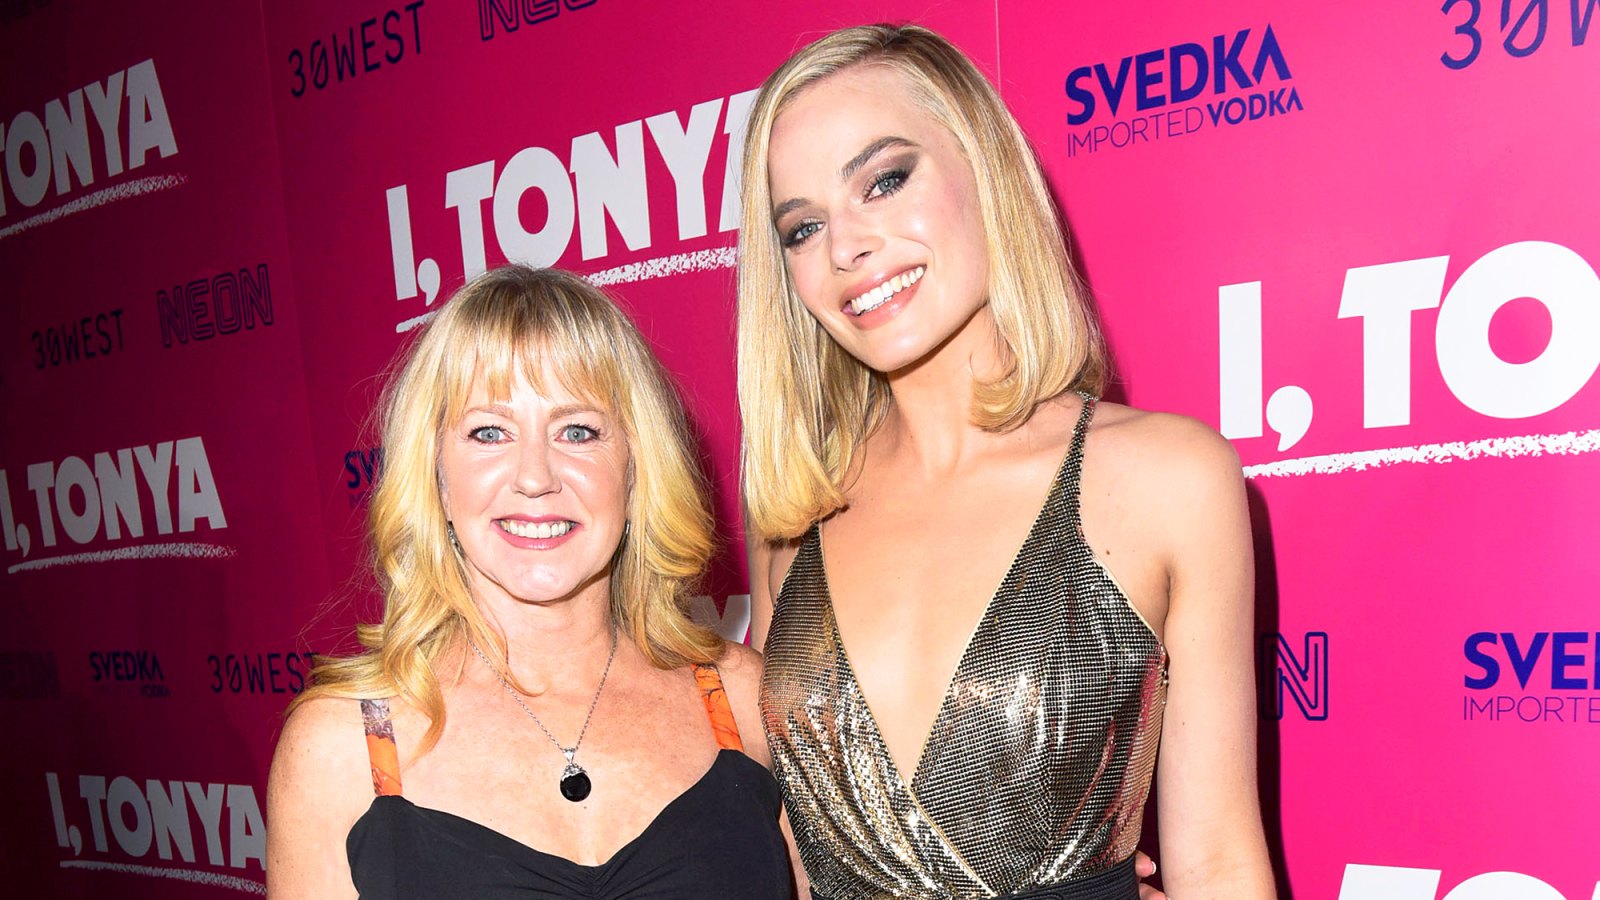 Tonya Harding and Margot Robbie attend NEON and 30WEST Present the Los Angeles Premiere of "I, Tonya" Supported By Svedka on December 5, 2017.